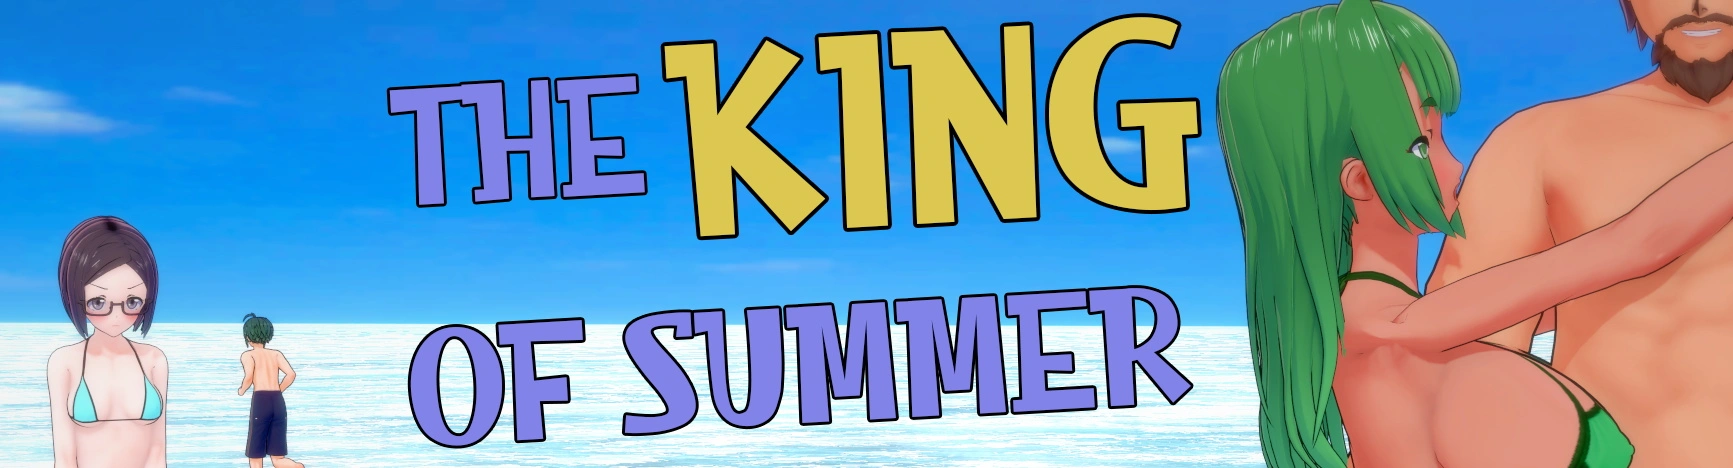 The King of Summer main image